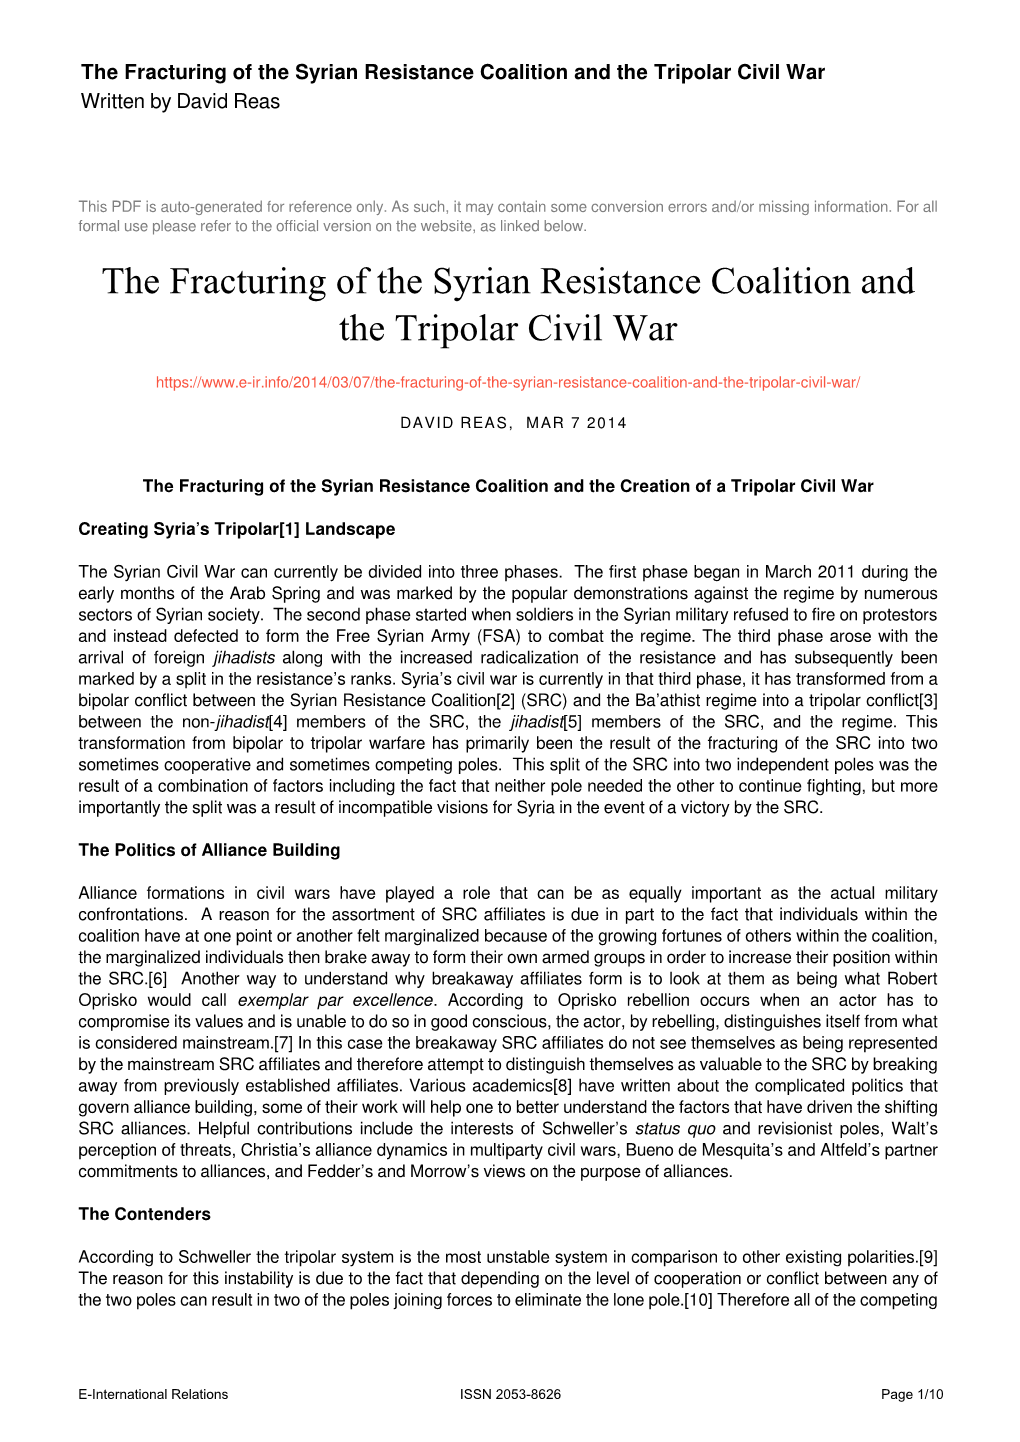 The Fracturing of the Syrian Resistance Coalition and the Tripolar Civil War Written by David Reas